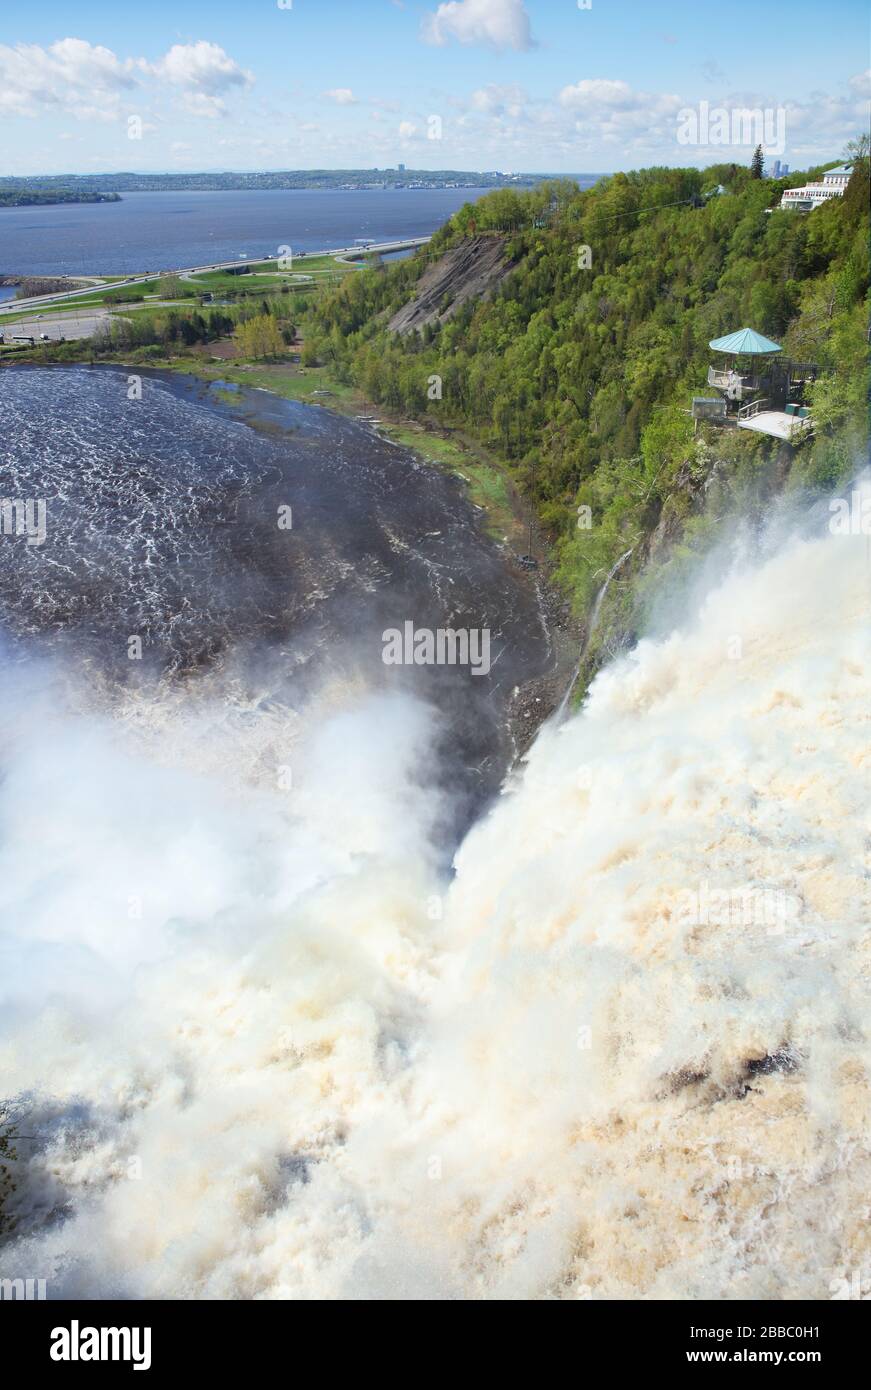 View from above the Montmorency Falls as water crashes into a bassin that in turn empties into the St. Lawrence River in the background, Parc de la Chute-Montmorency near Quebec City, Quebec, Canada Stock Photo